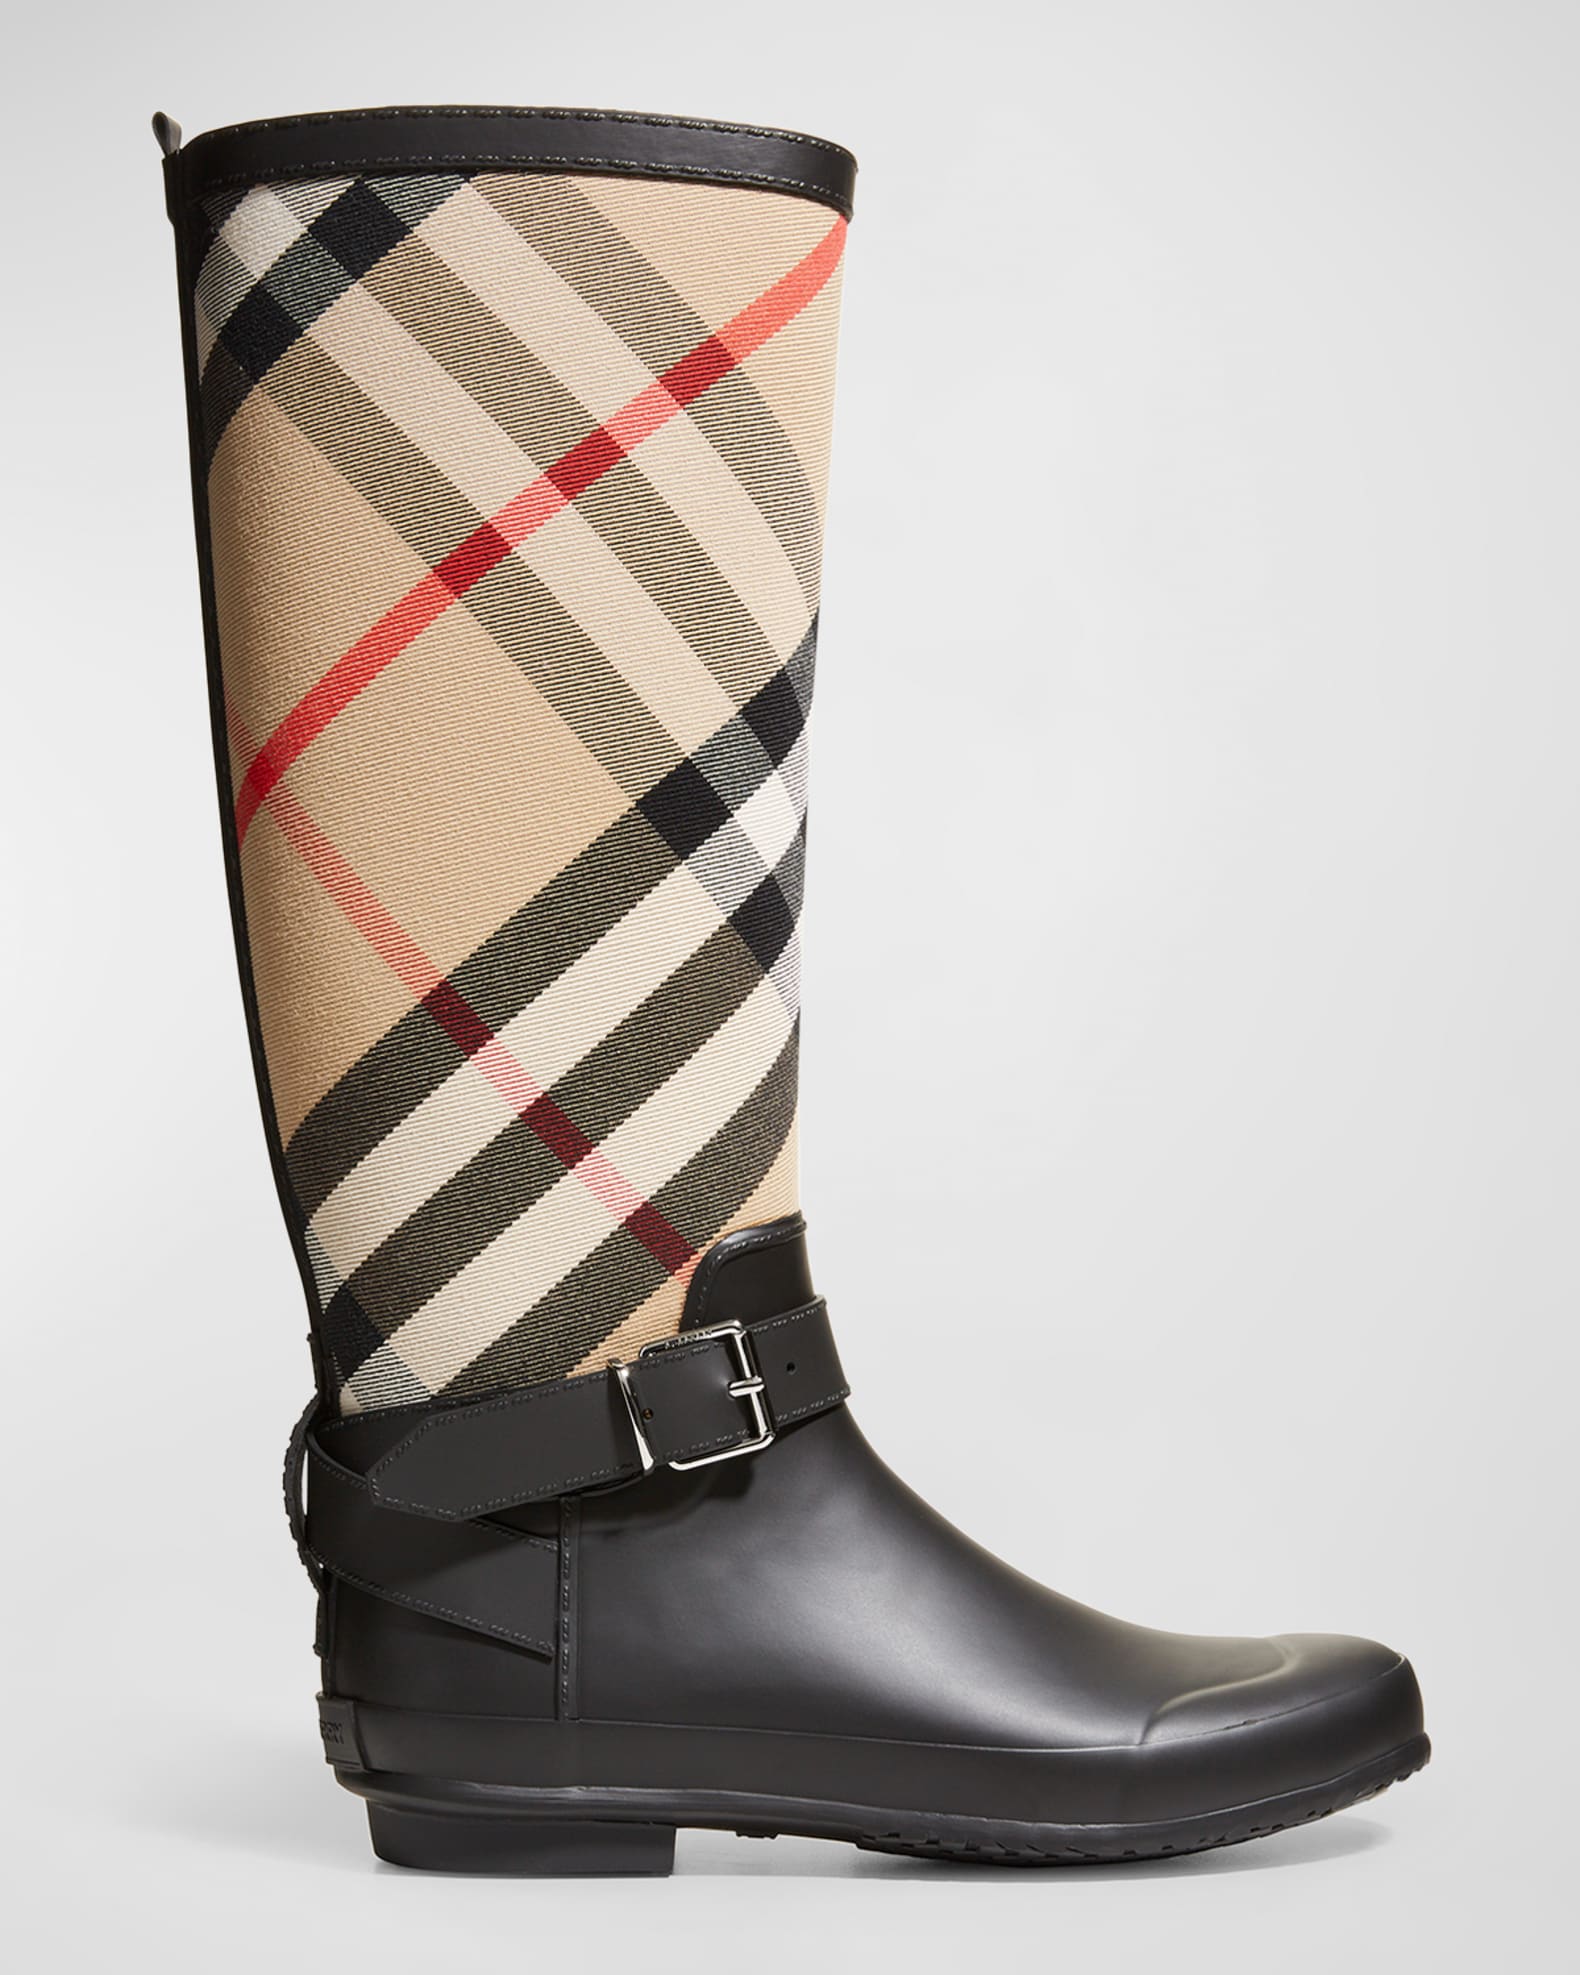 Edgy Weather Protection: Burberry Moto Rain Boots